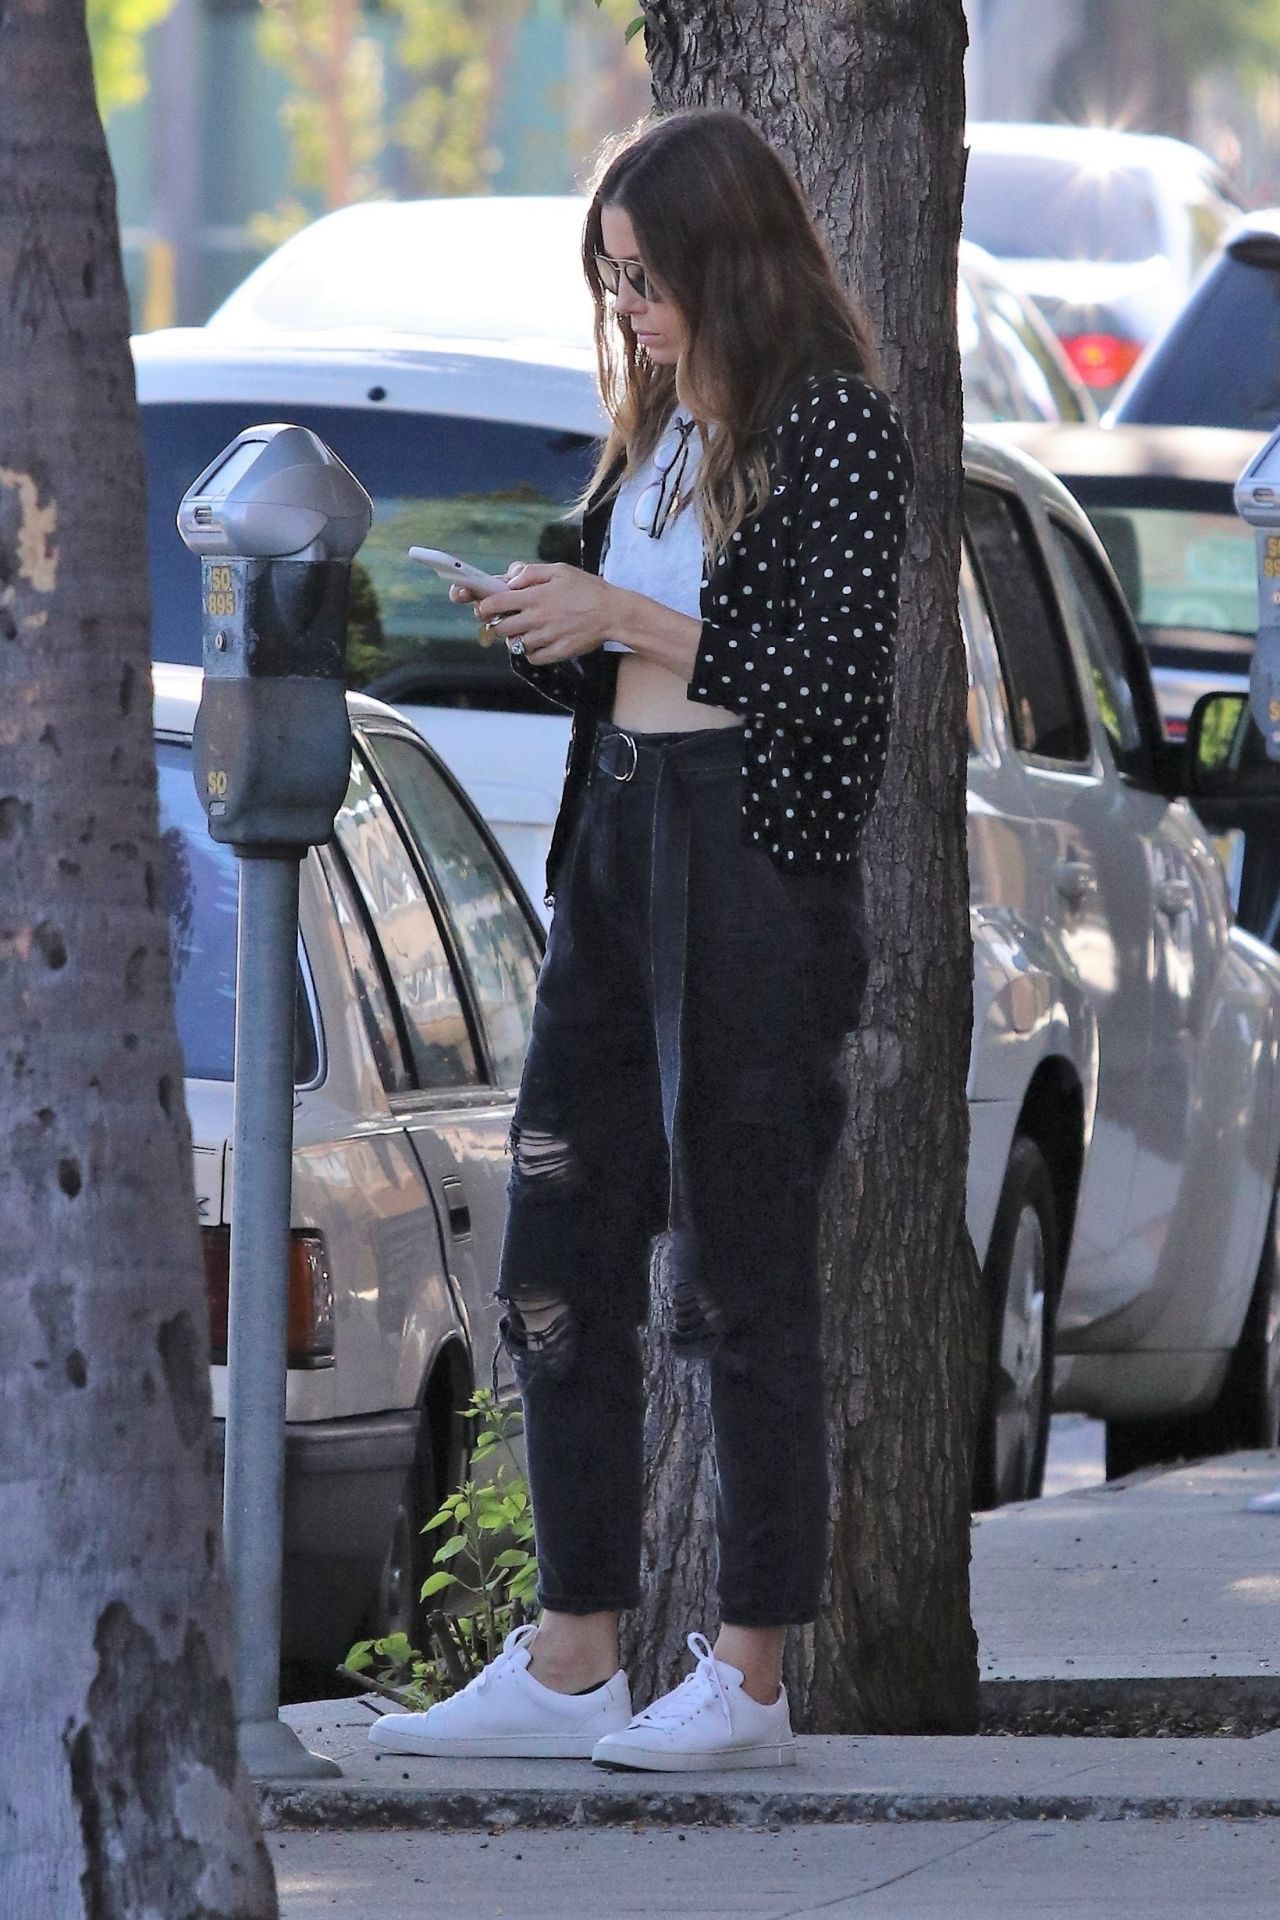 Jessica Biel Shows Her Tummy While Walking On The Street